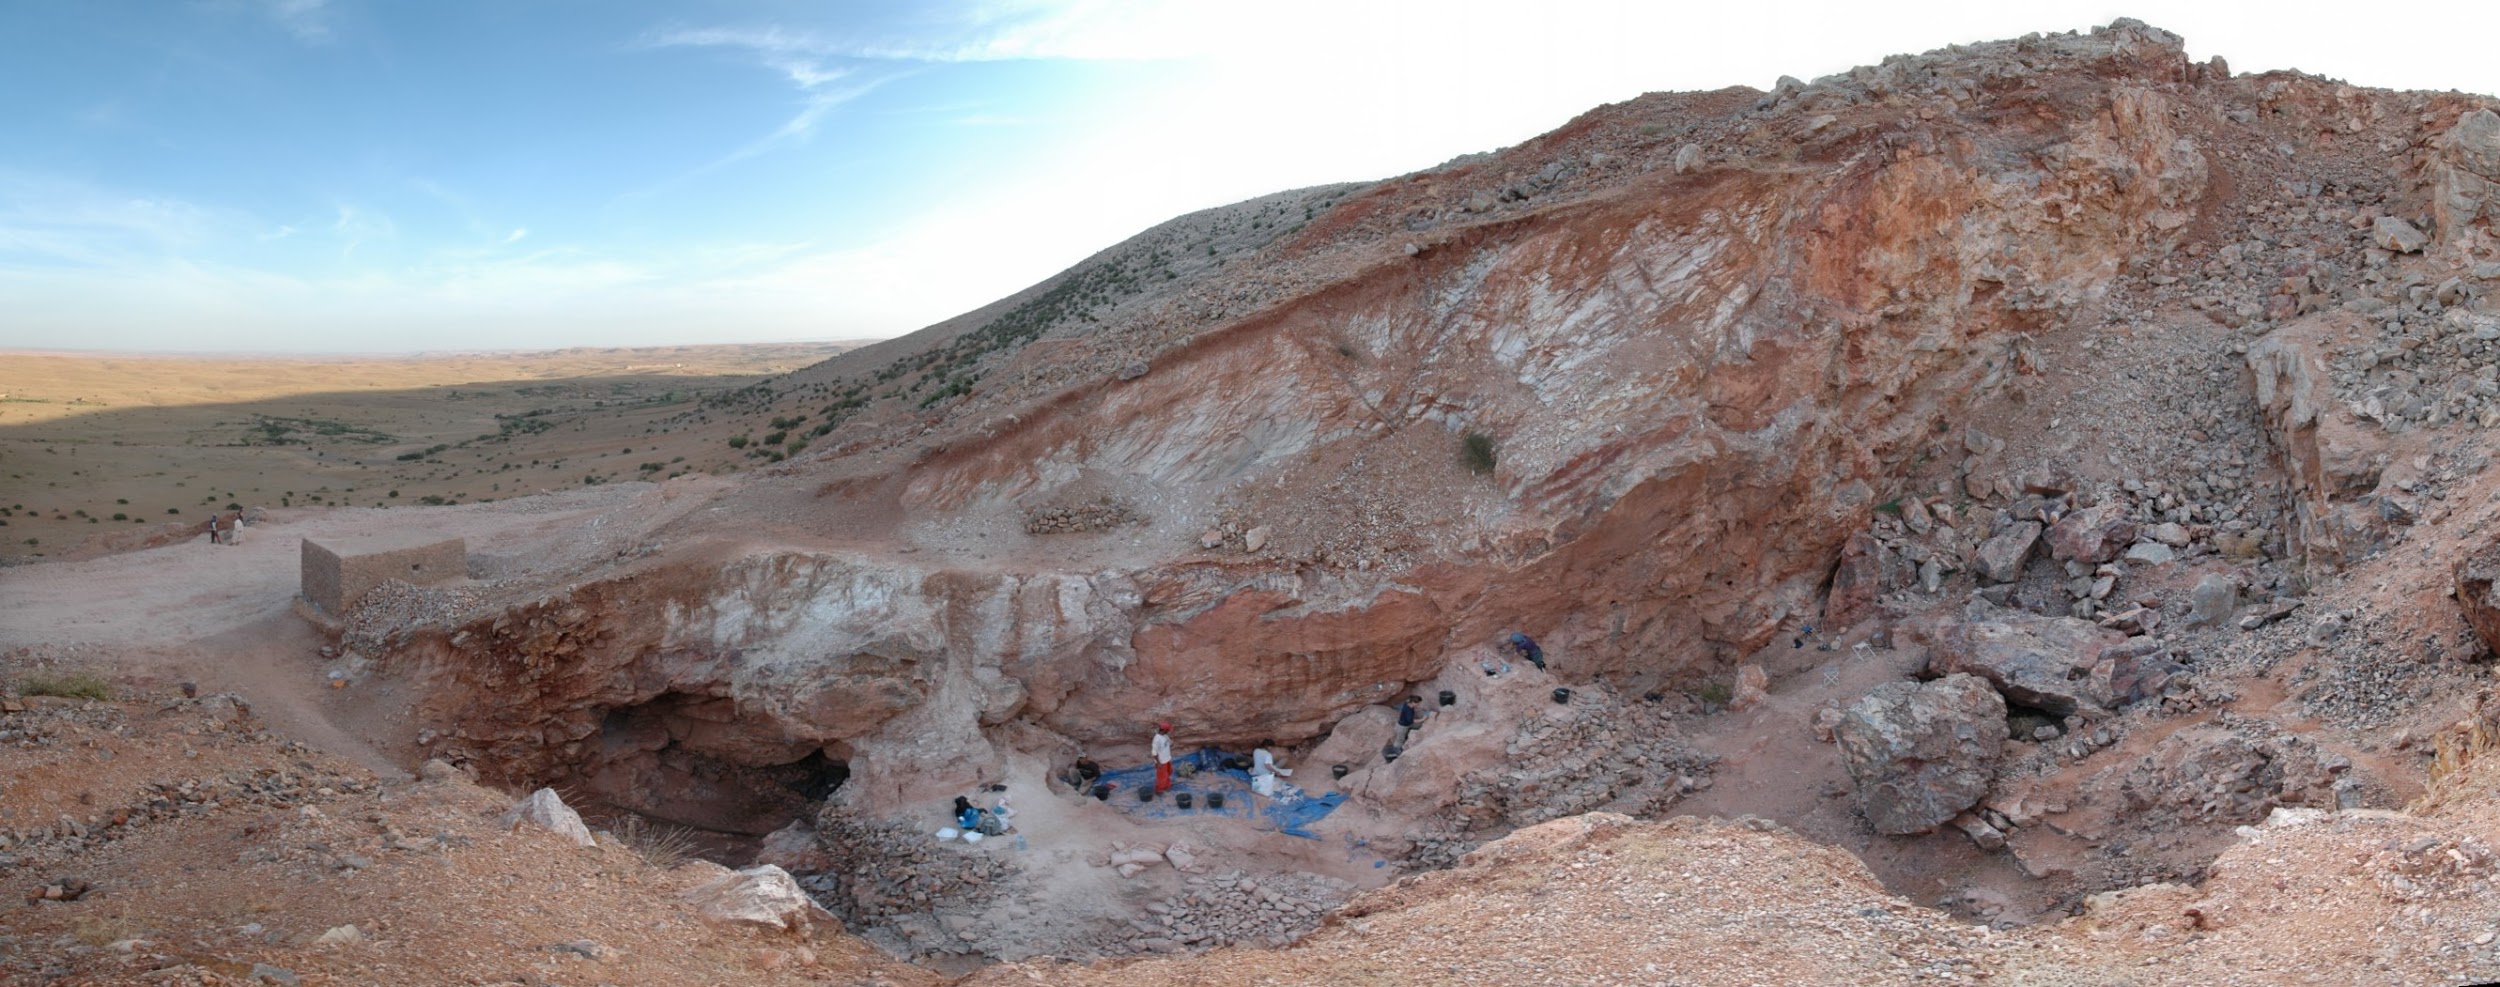 The excavation of an exposed cave at Jebel Irhoud, Morocco, where hominin fossils were found in the 1960s and in 2007. 